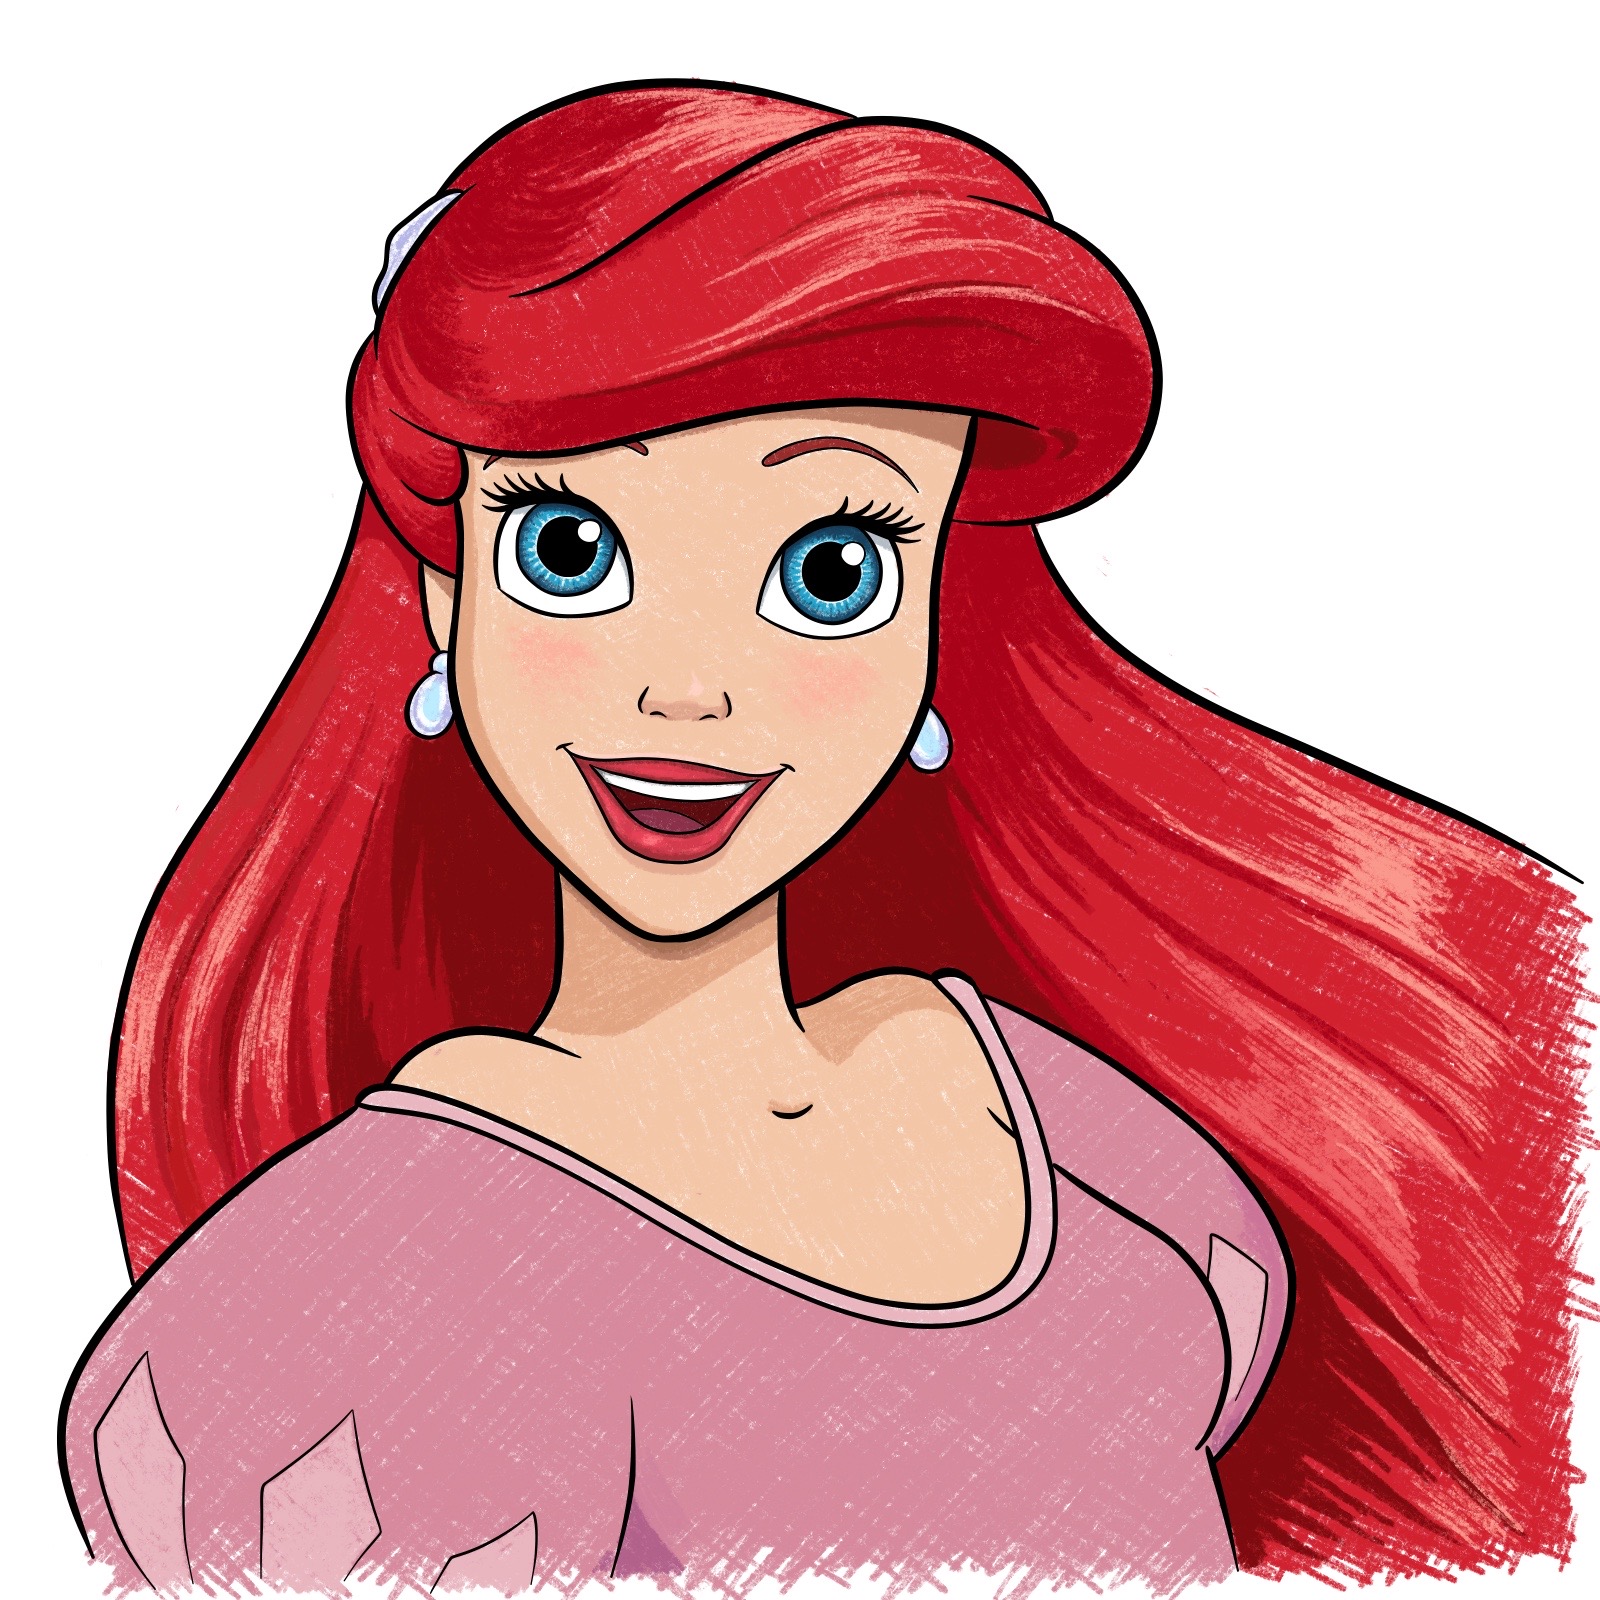 Drawing Guide: How to Draw the Face of Ariel, The Little Mermaid